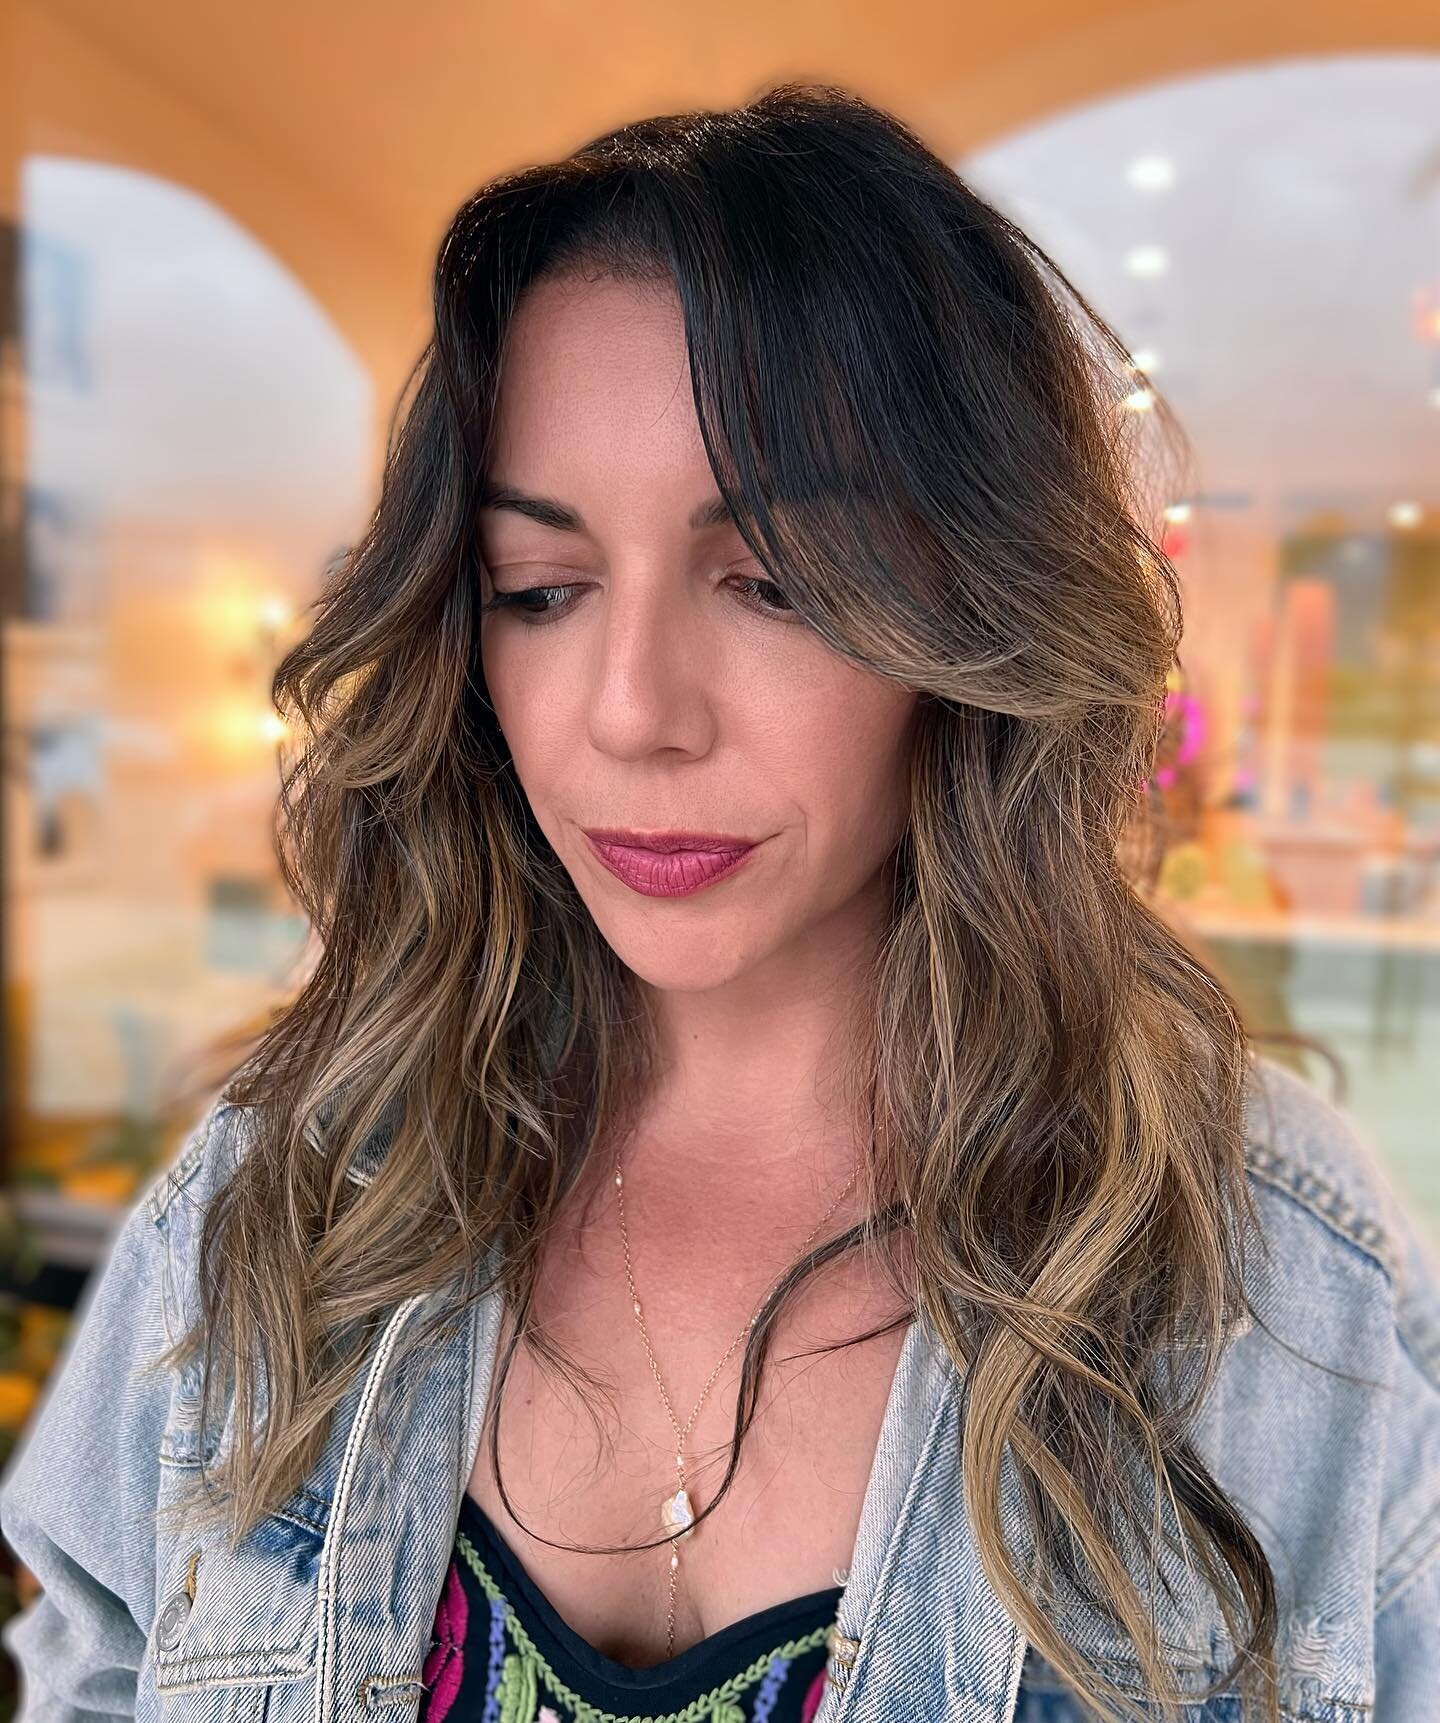 The perfect blend with one row of hand tied JZ extensions for fullness! Chefs kiss 😘 

@shanonrose.stylist